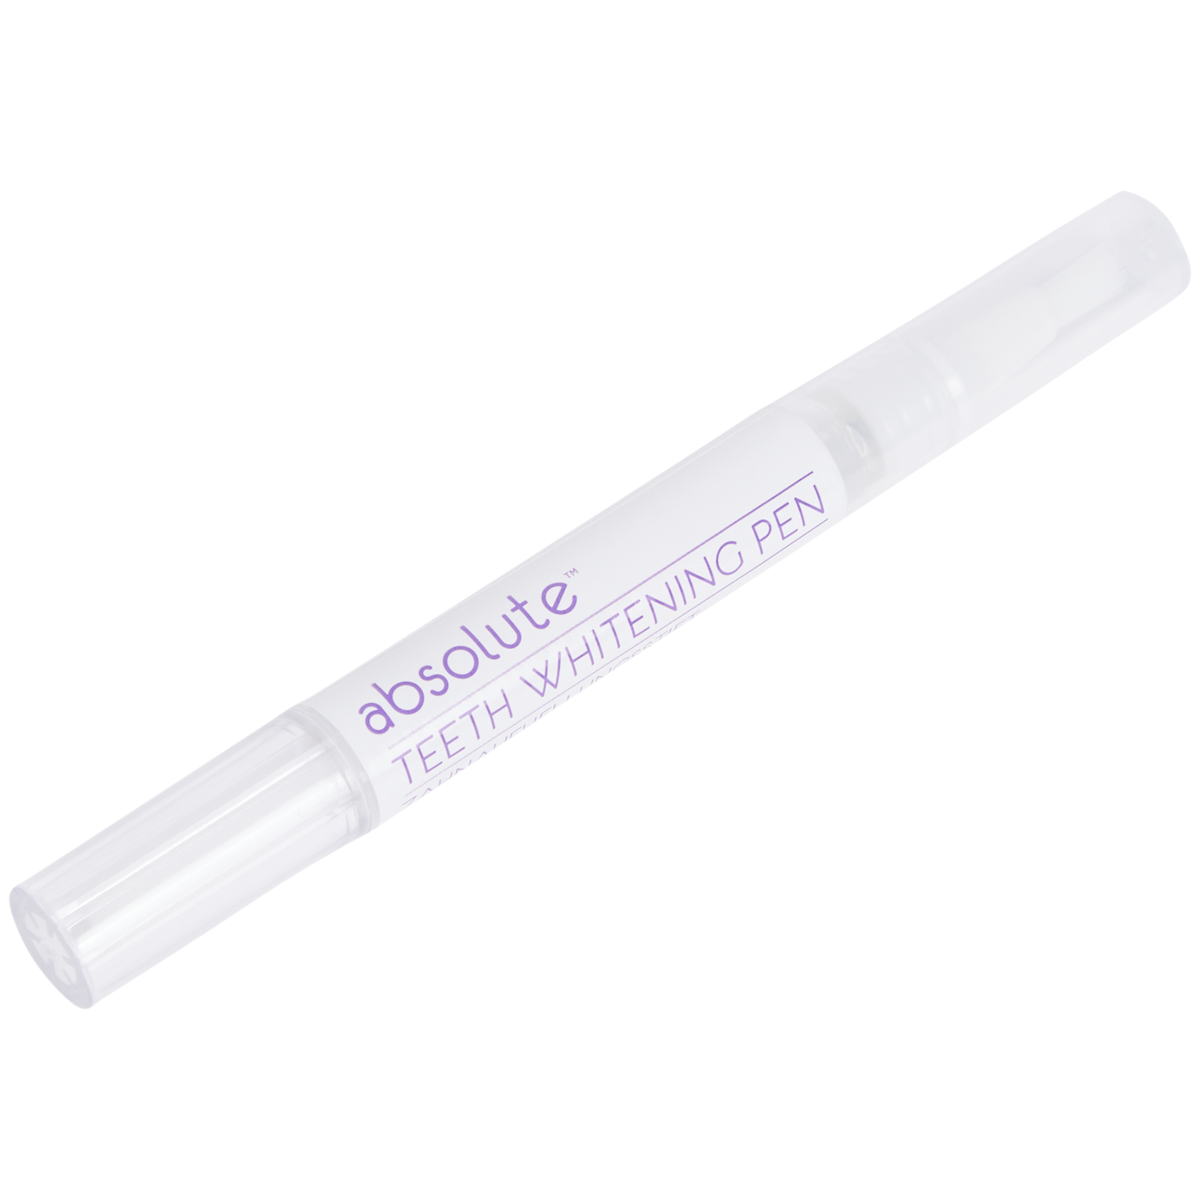 Stylo de blanchiment dentaire Absolute White